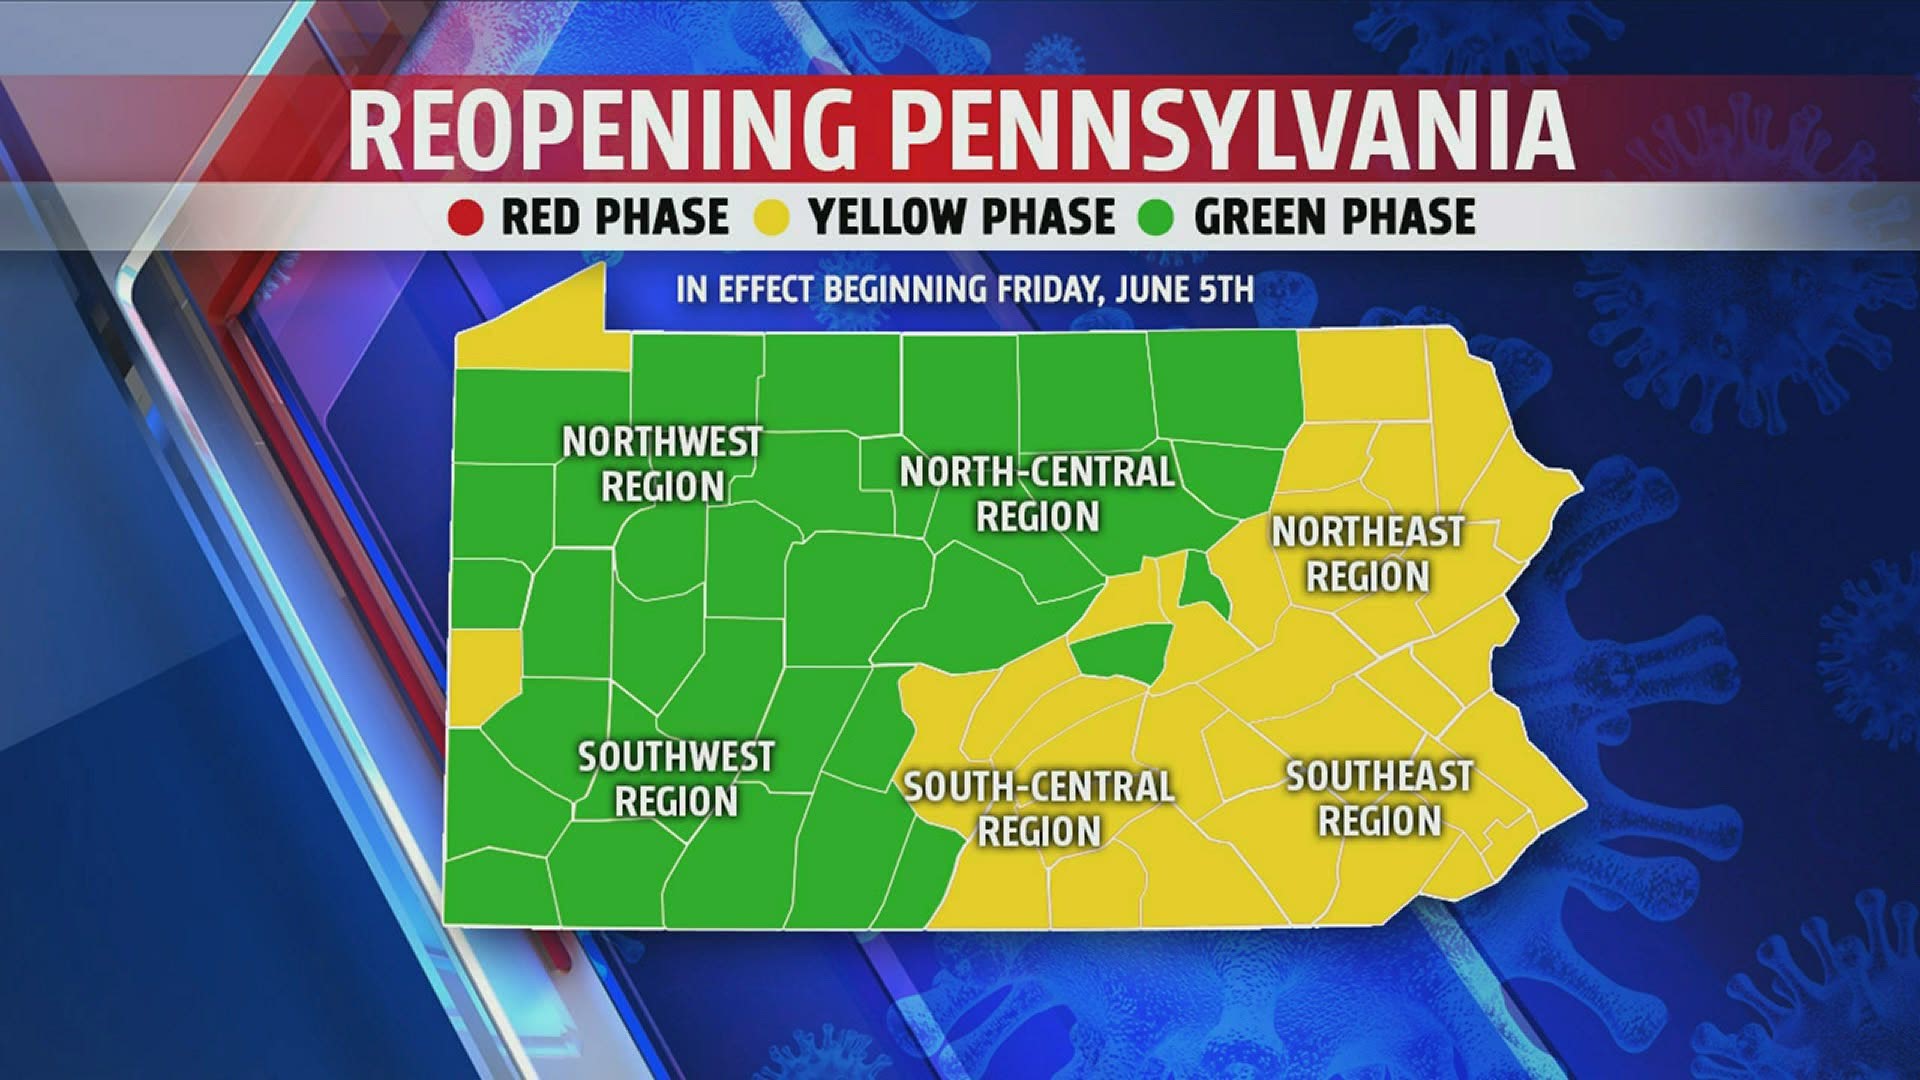 On Friday, June 5, the entire state should be in Yellow or Green Phases of the coronavirus reopening plan.